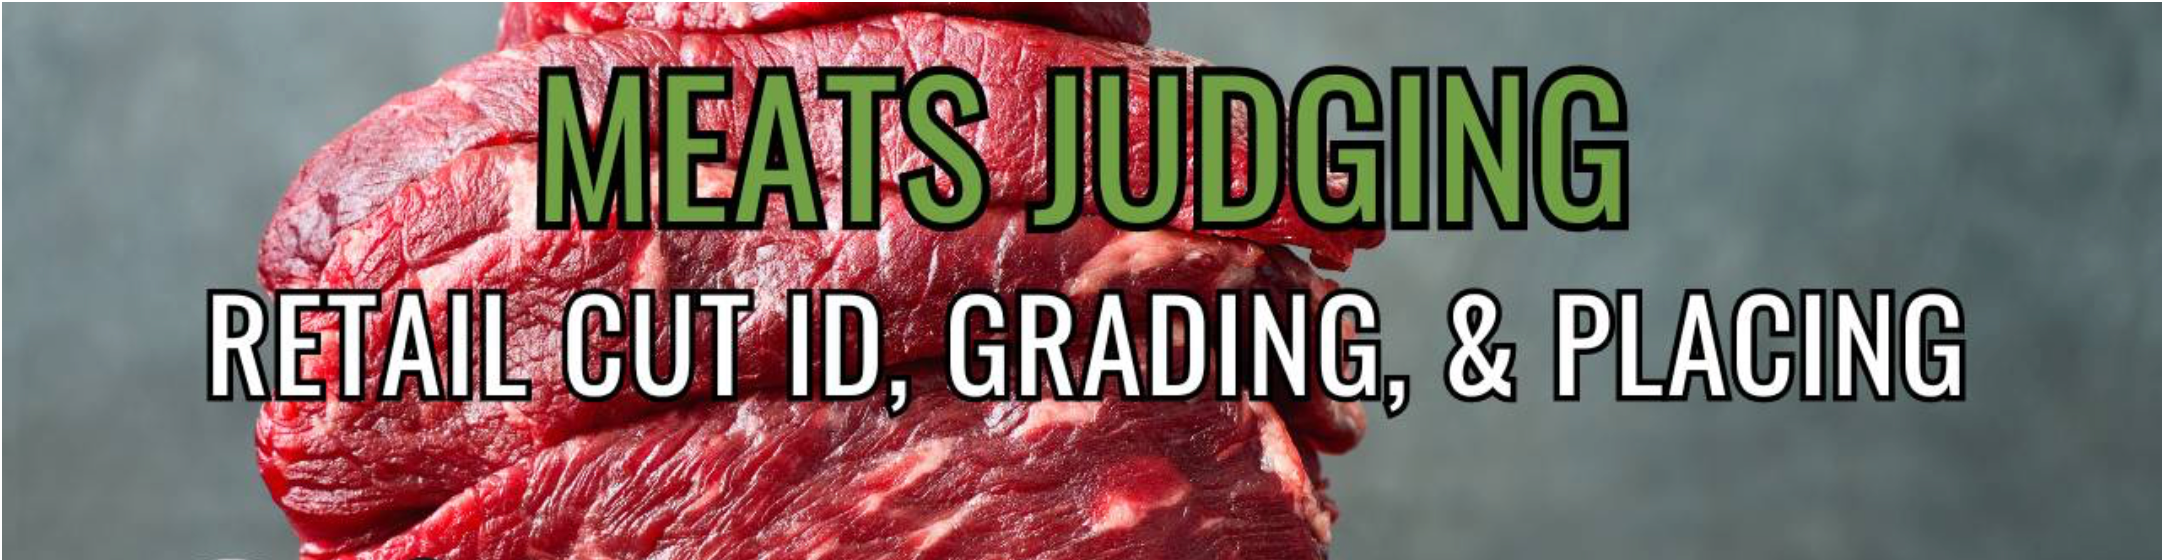 Meats Judging ID, Grading, and Placing Videos on PlowVideos.com